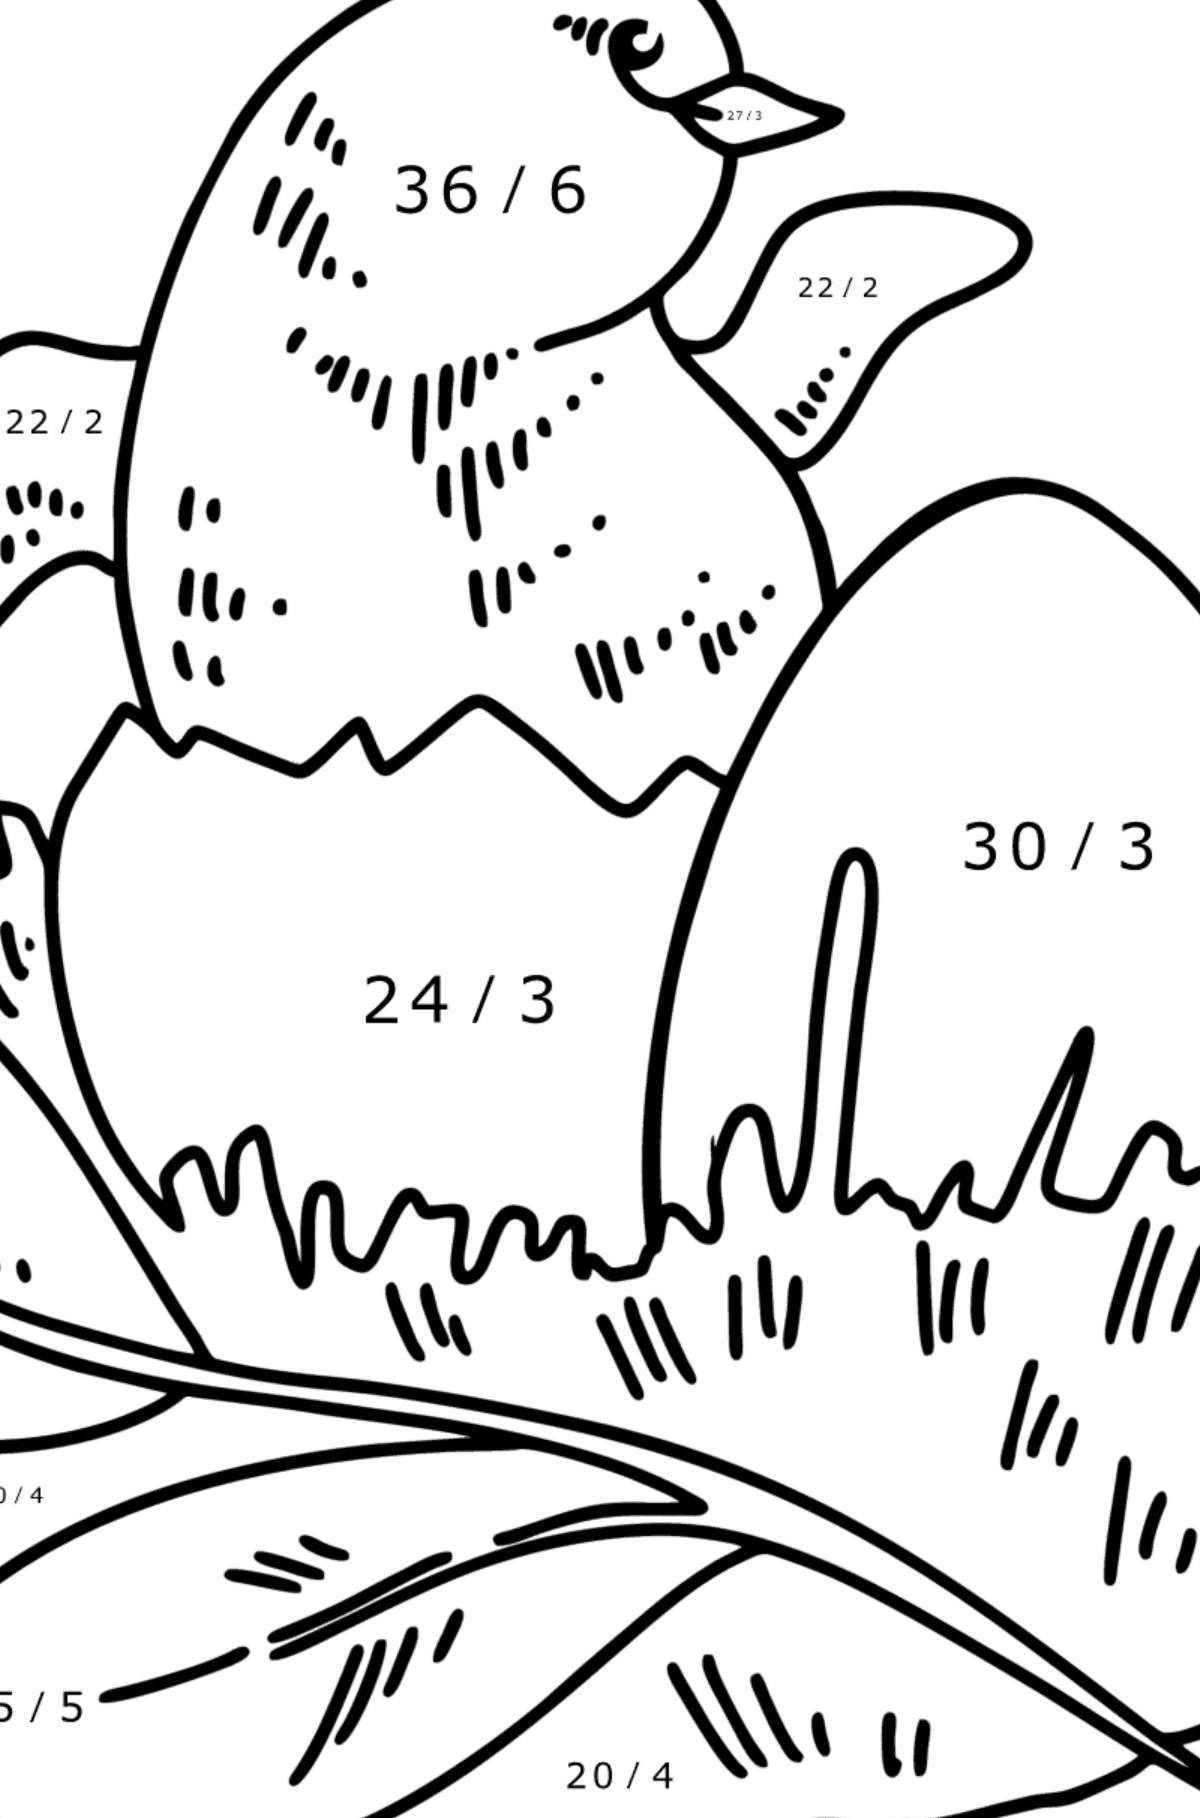 Chick in the Nest coloring page - Math Coloring - Division for Kids